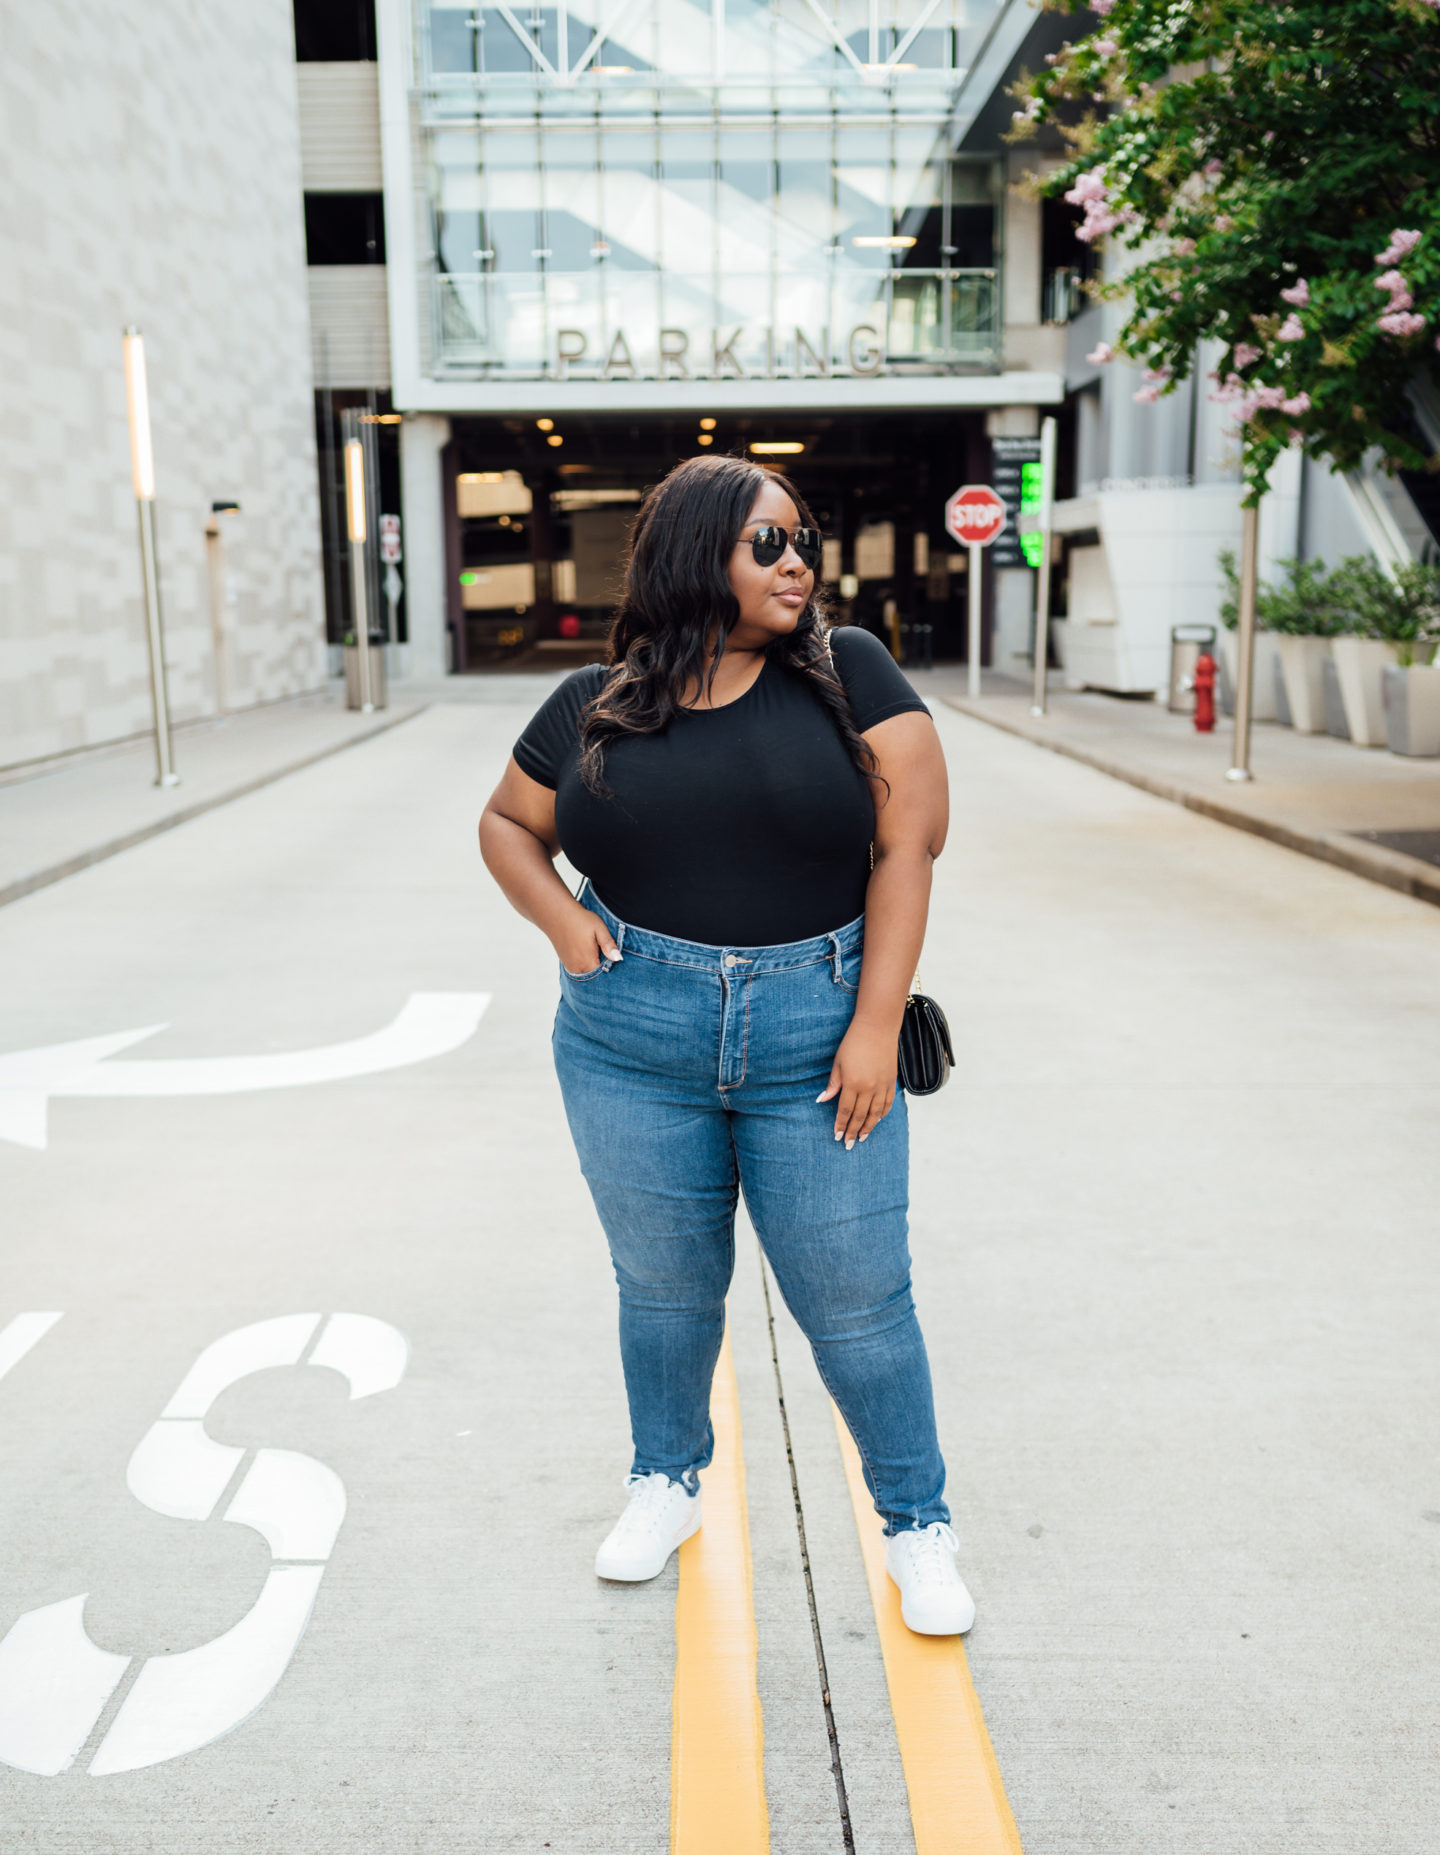 How I became a full time Influencer! - From Head To Curve